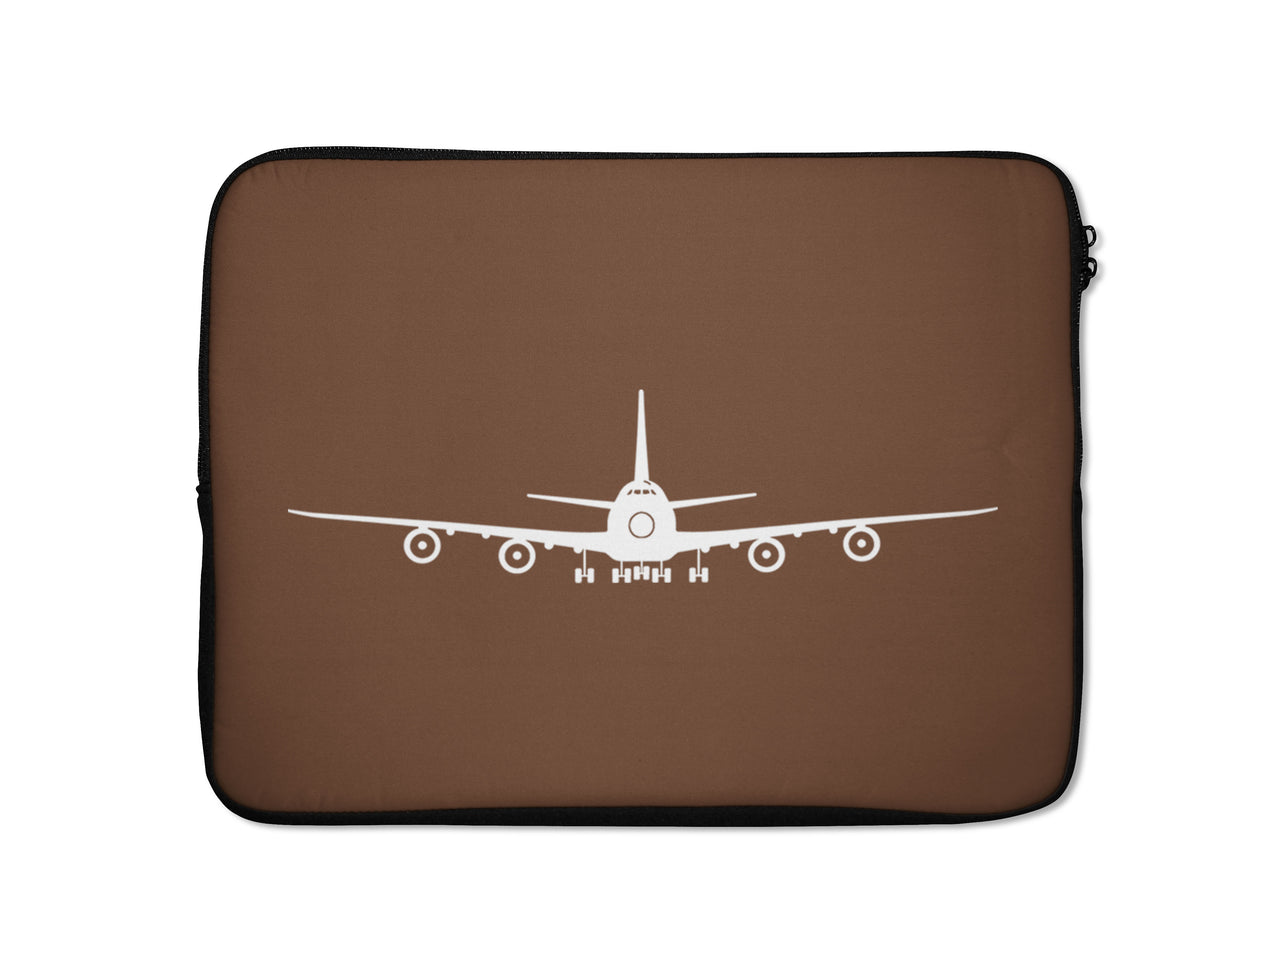 Boeing 747 Silhouette Silhouette Designed Laptop & Tablet Cases